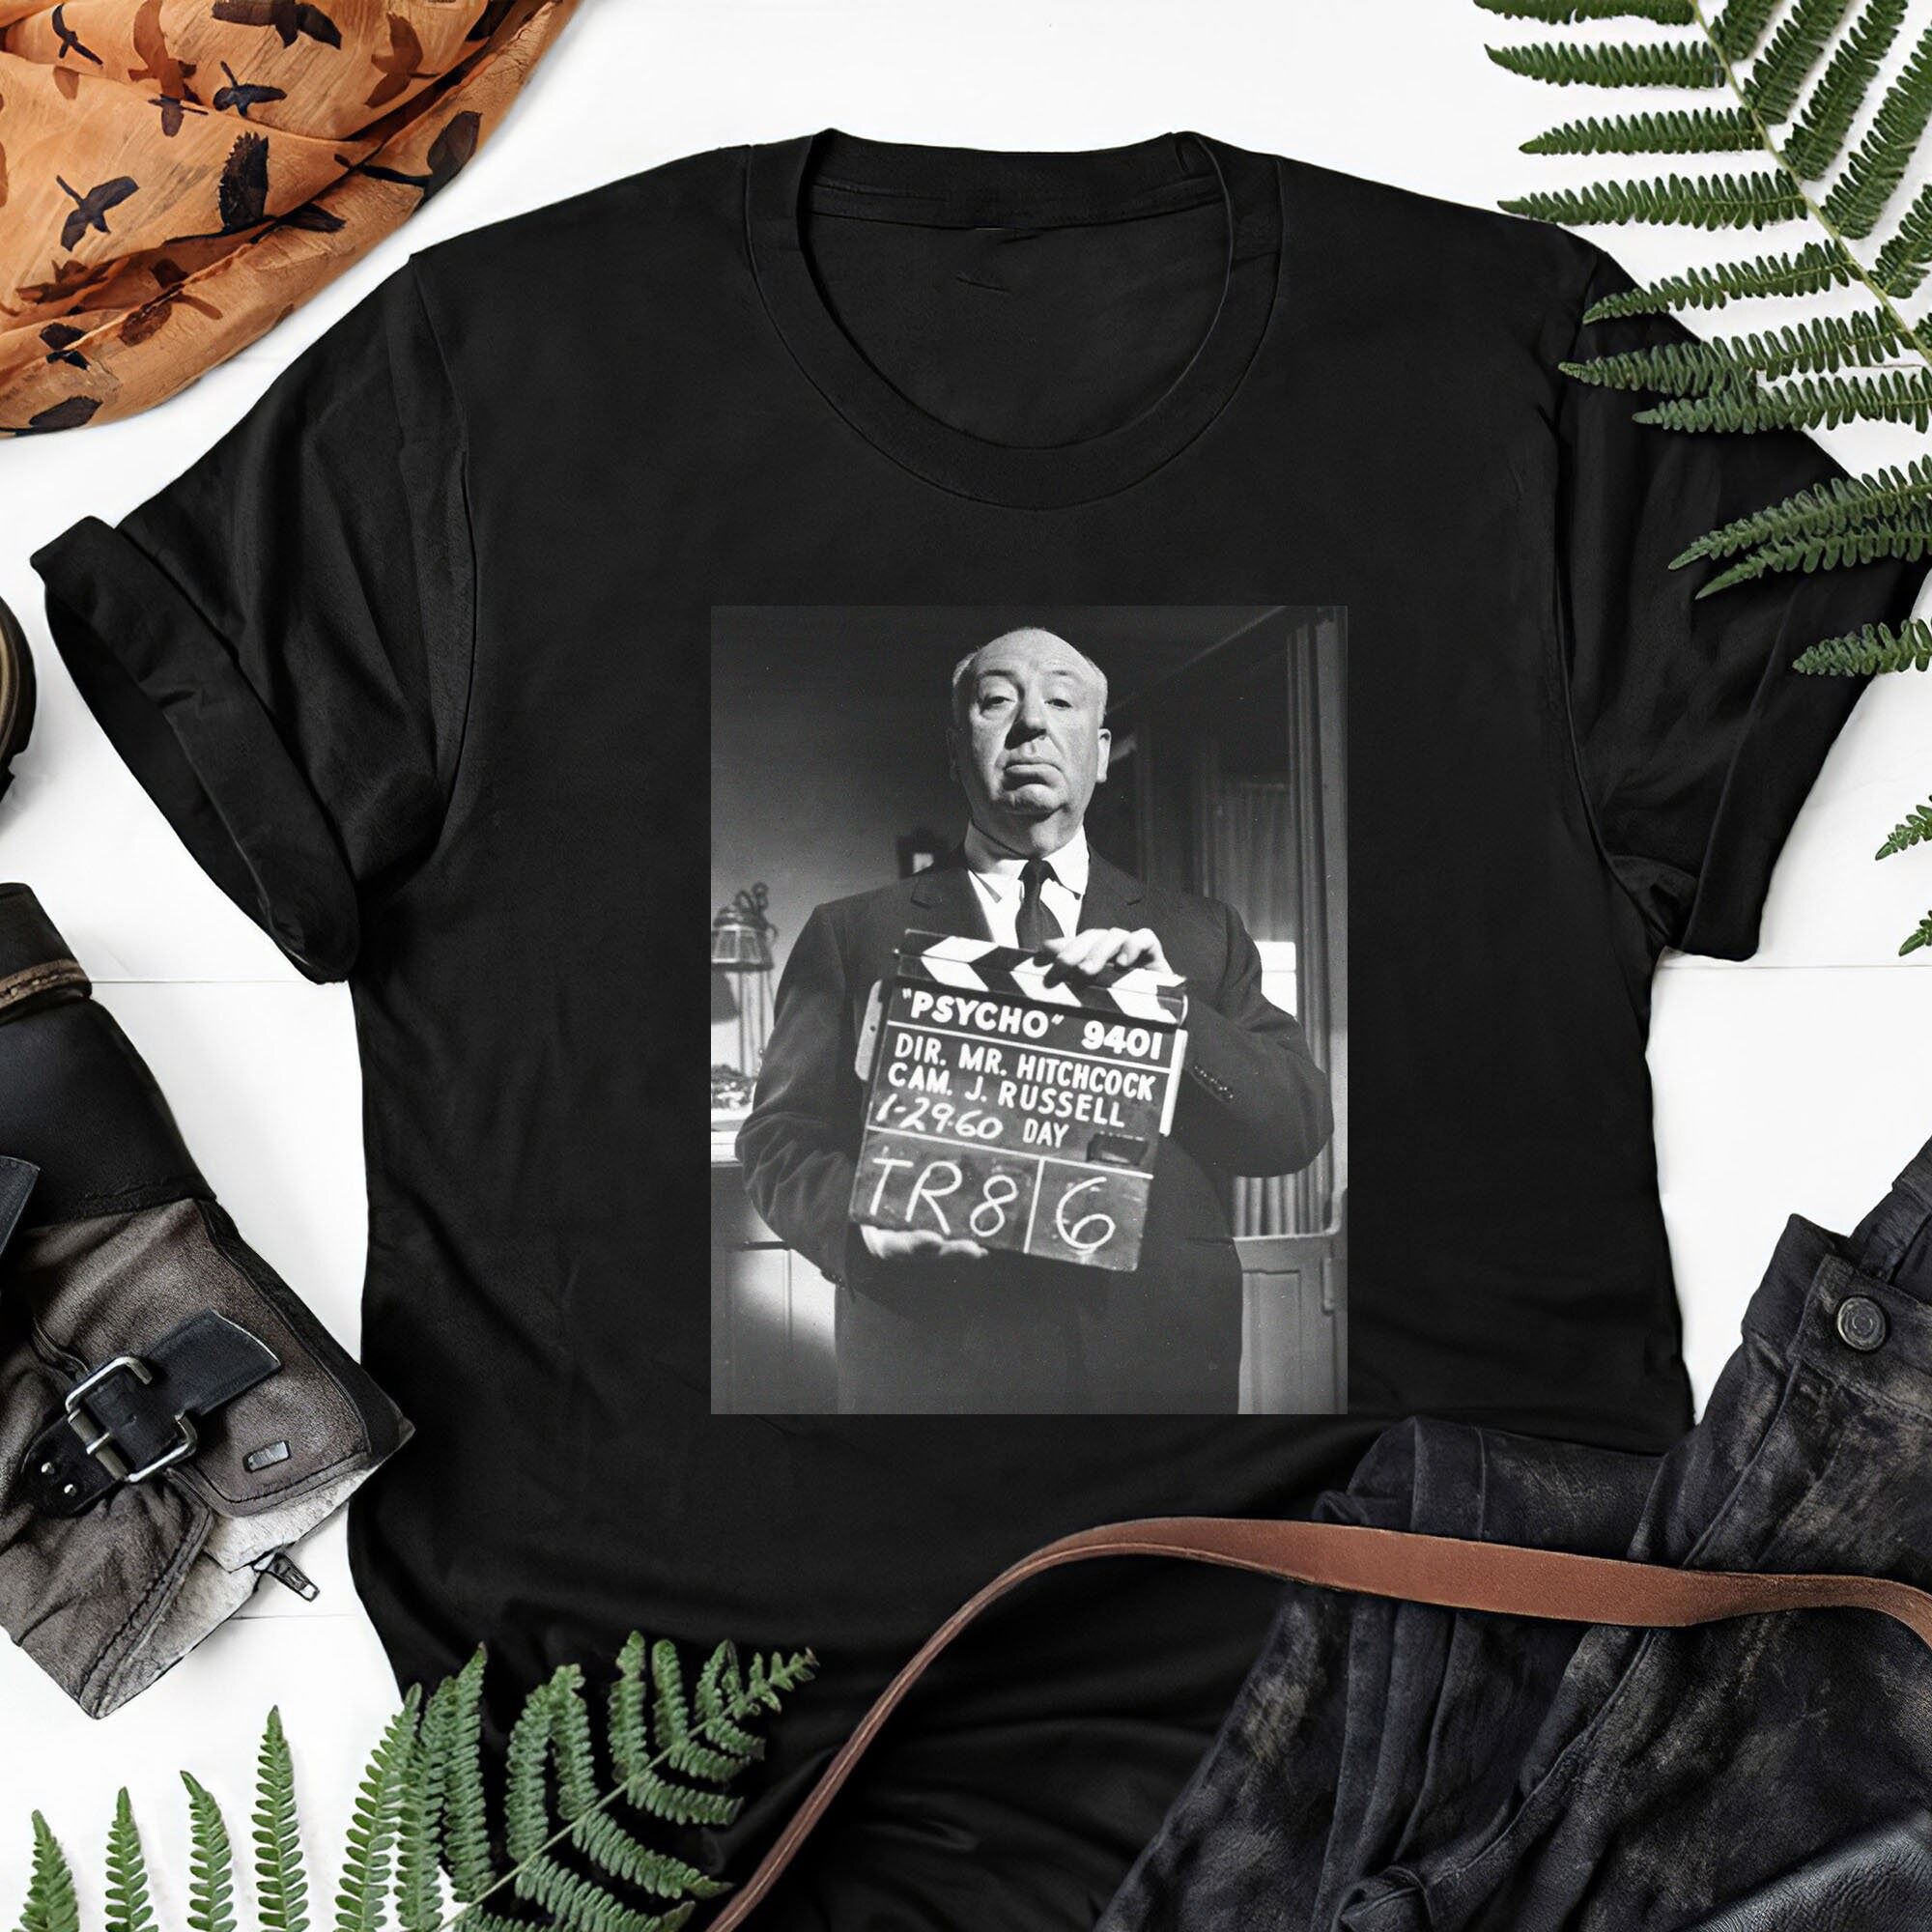 Alfred Hitchcock Poster Psycho Gift Tee For Men Women Unisex T-shirt